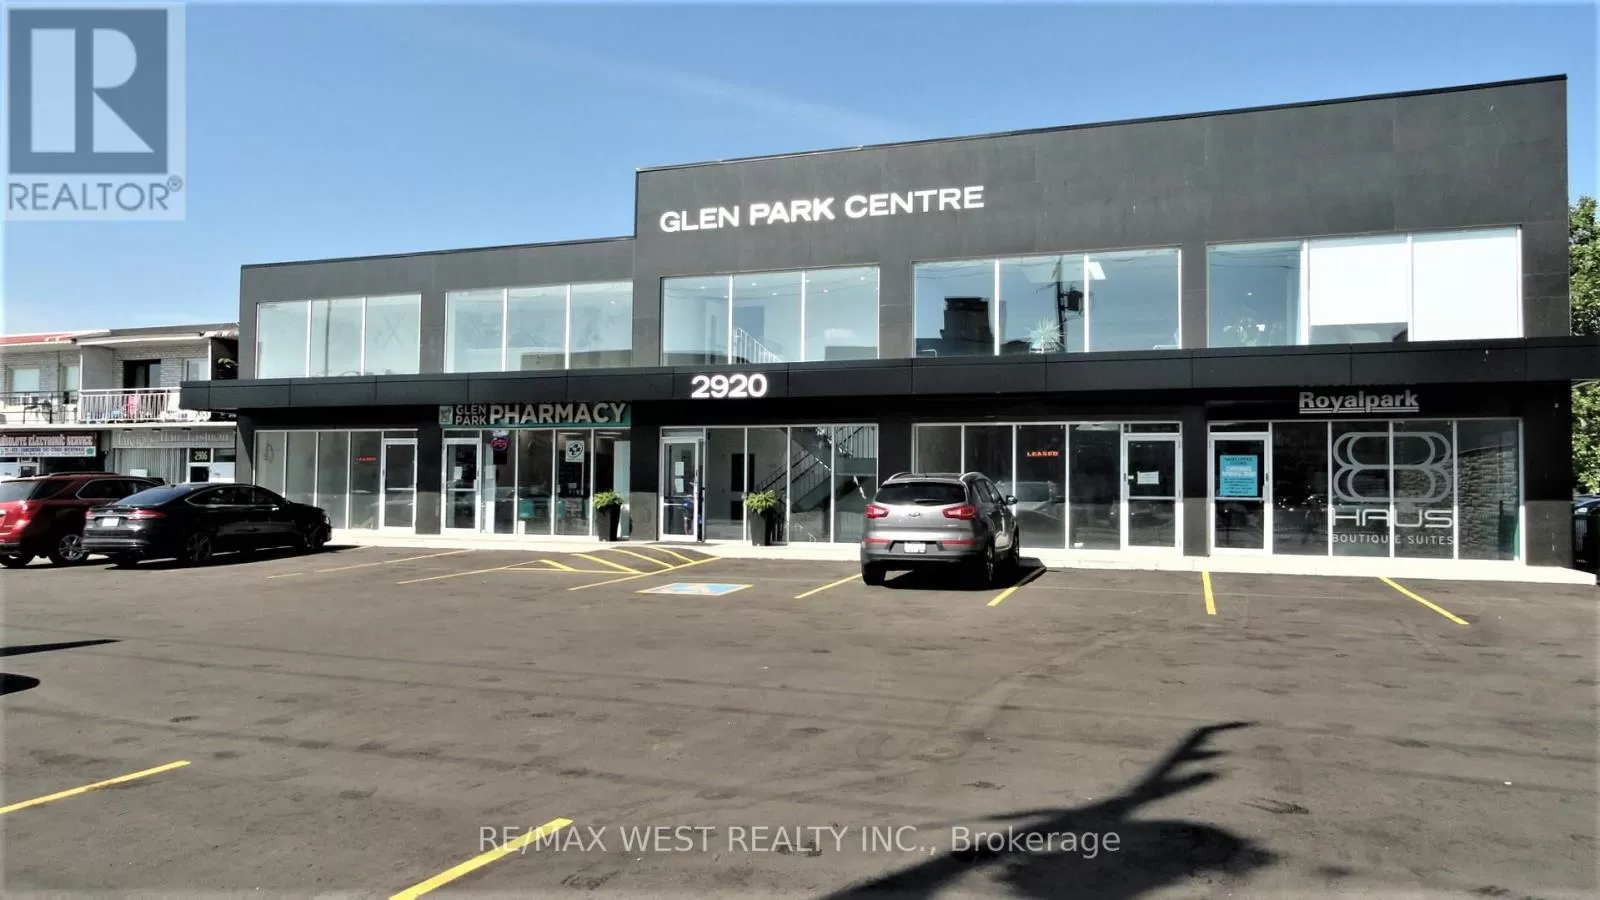 Offices for rent: Ll2 - 2920 Dufferin Street, Toronto, Ontario M6B 3S8